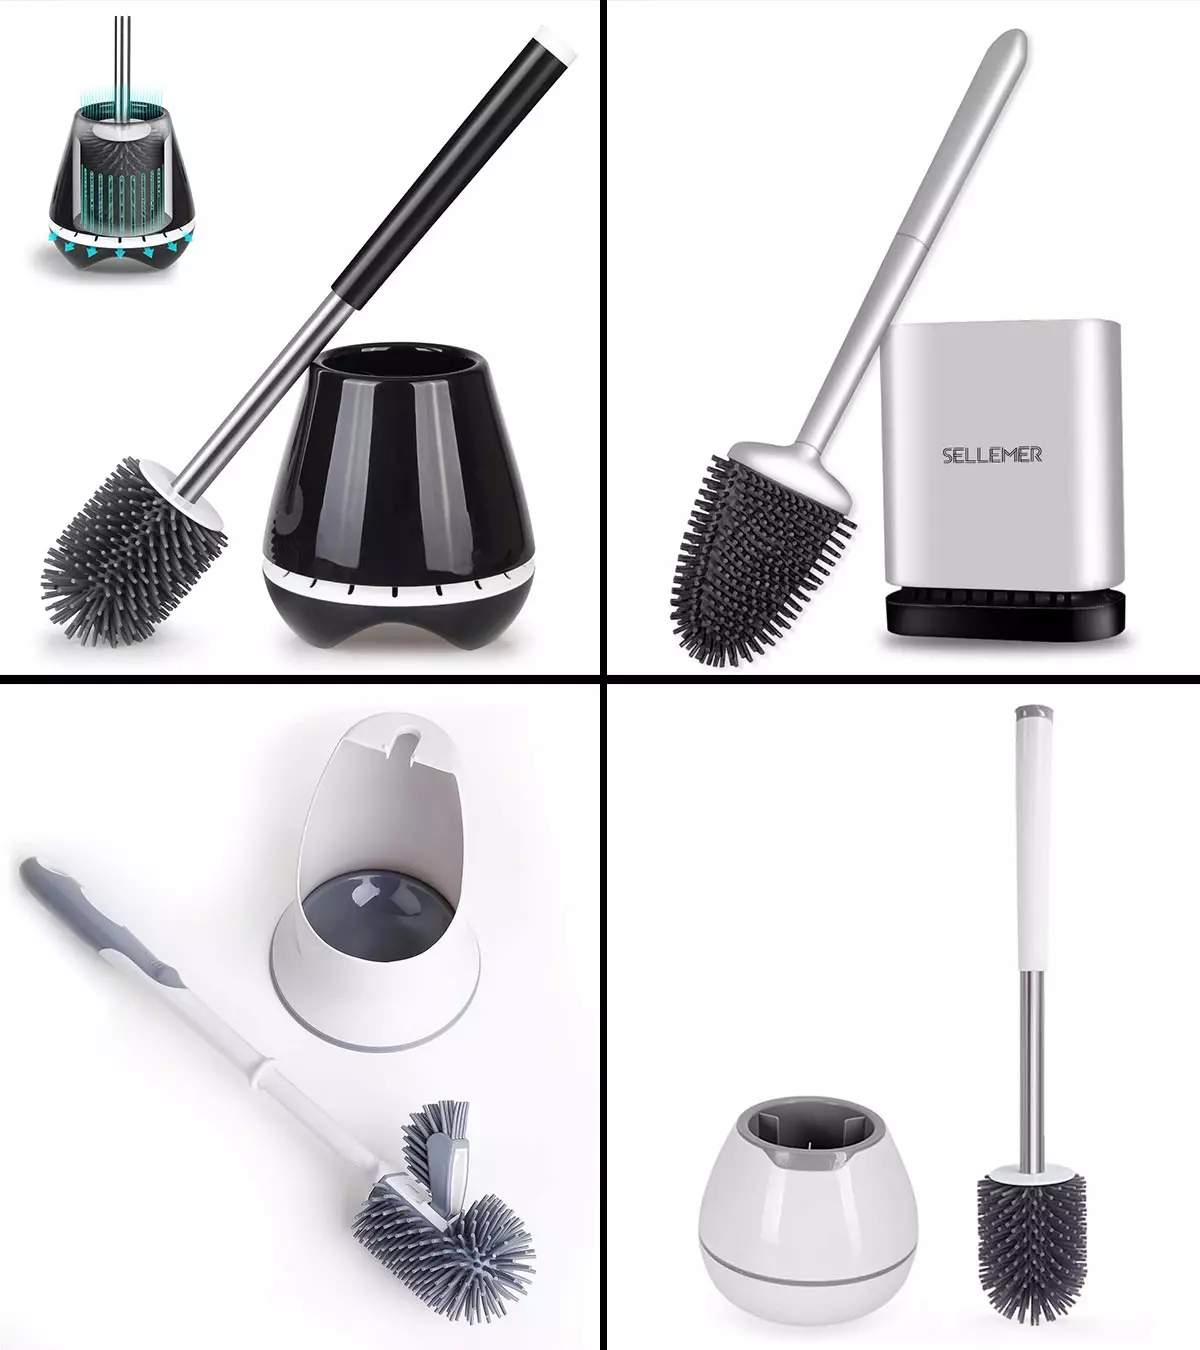 11 Best Toilet Brushes To Make Your Toilet Sparkle!